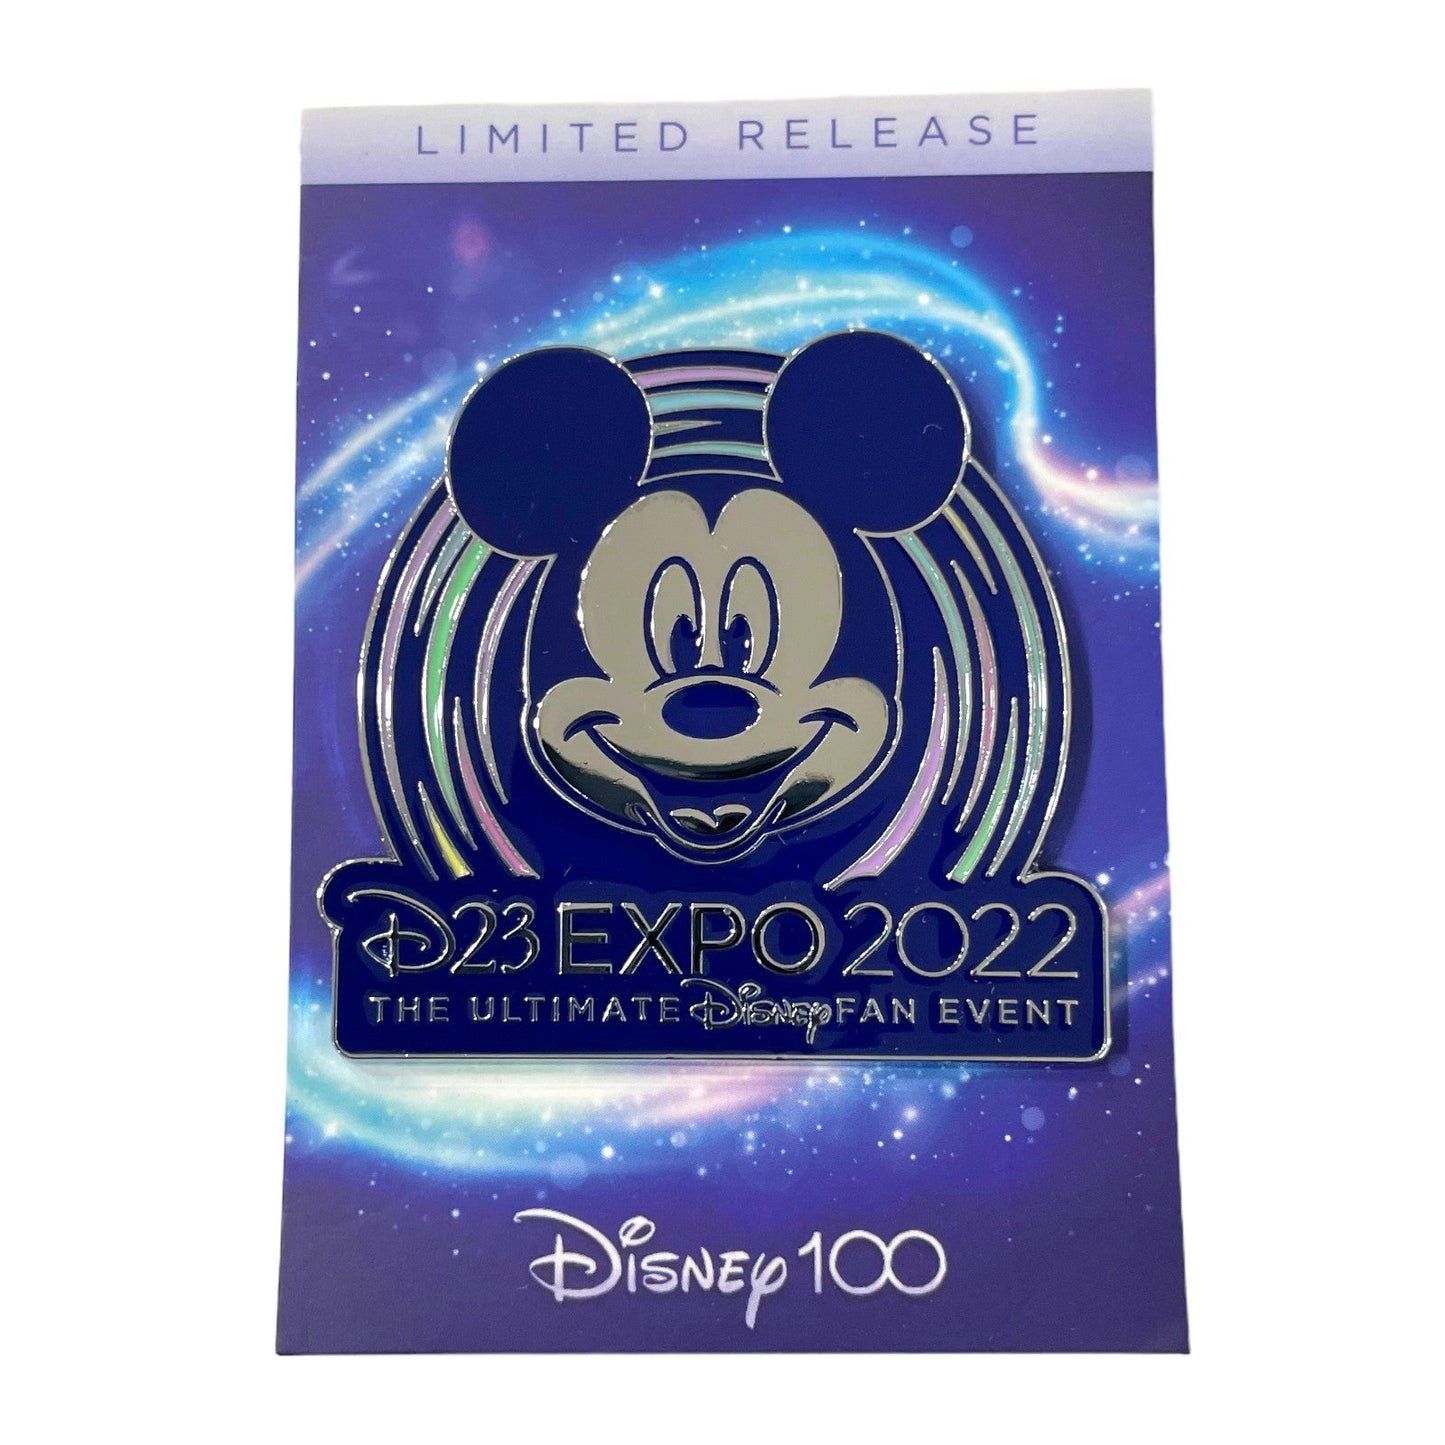 Exclusive D23 Expo 2022 Collector's Pin - Limited Release